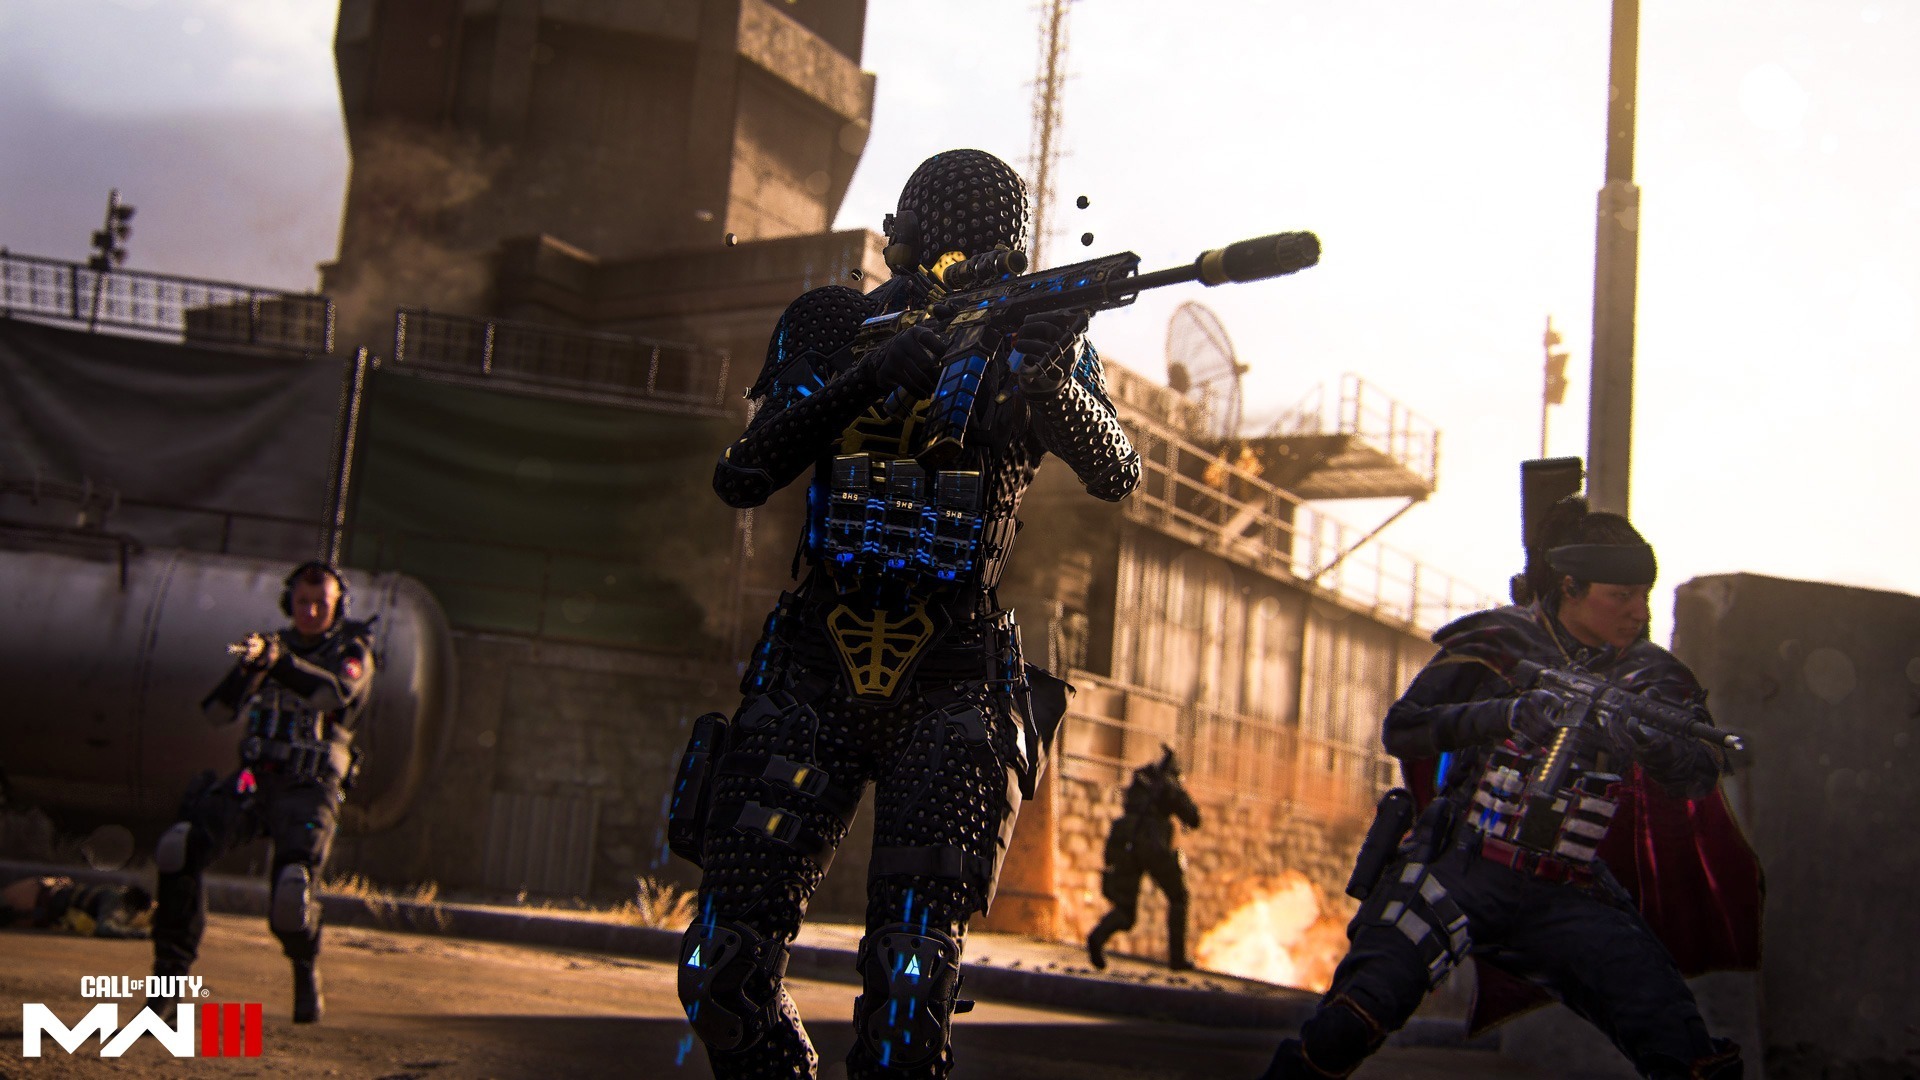 MW3 And Warzone Season 4 Patch Notes: Release Date, Battle Pass, Zombies, Weapons, Maps And Everything You Need To Know